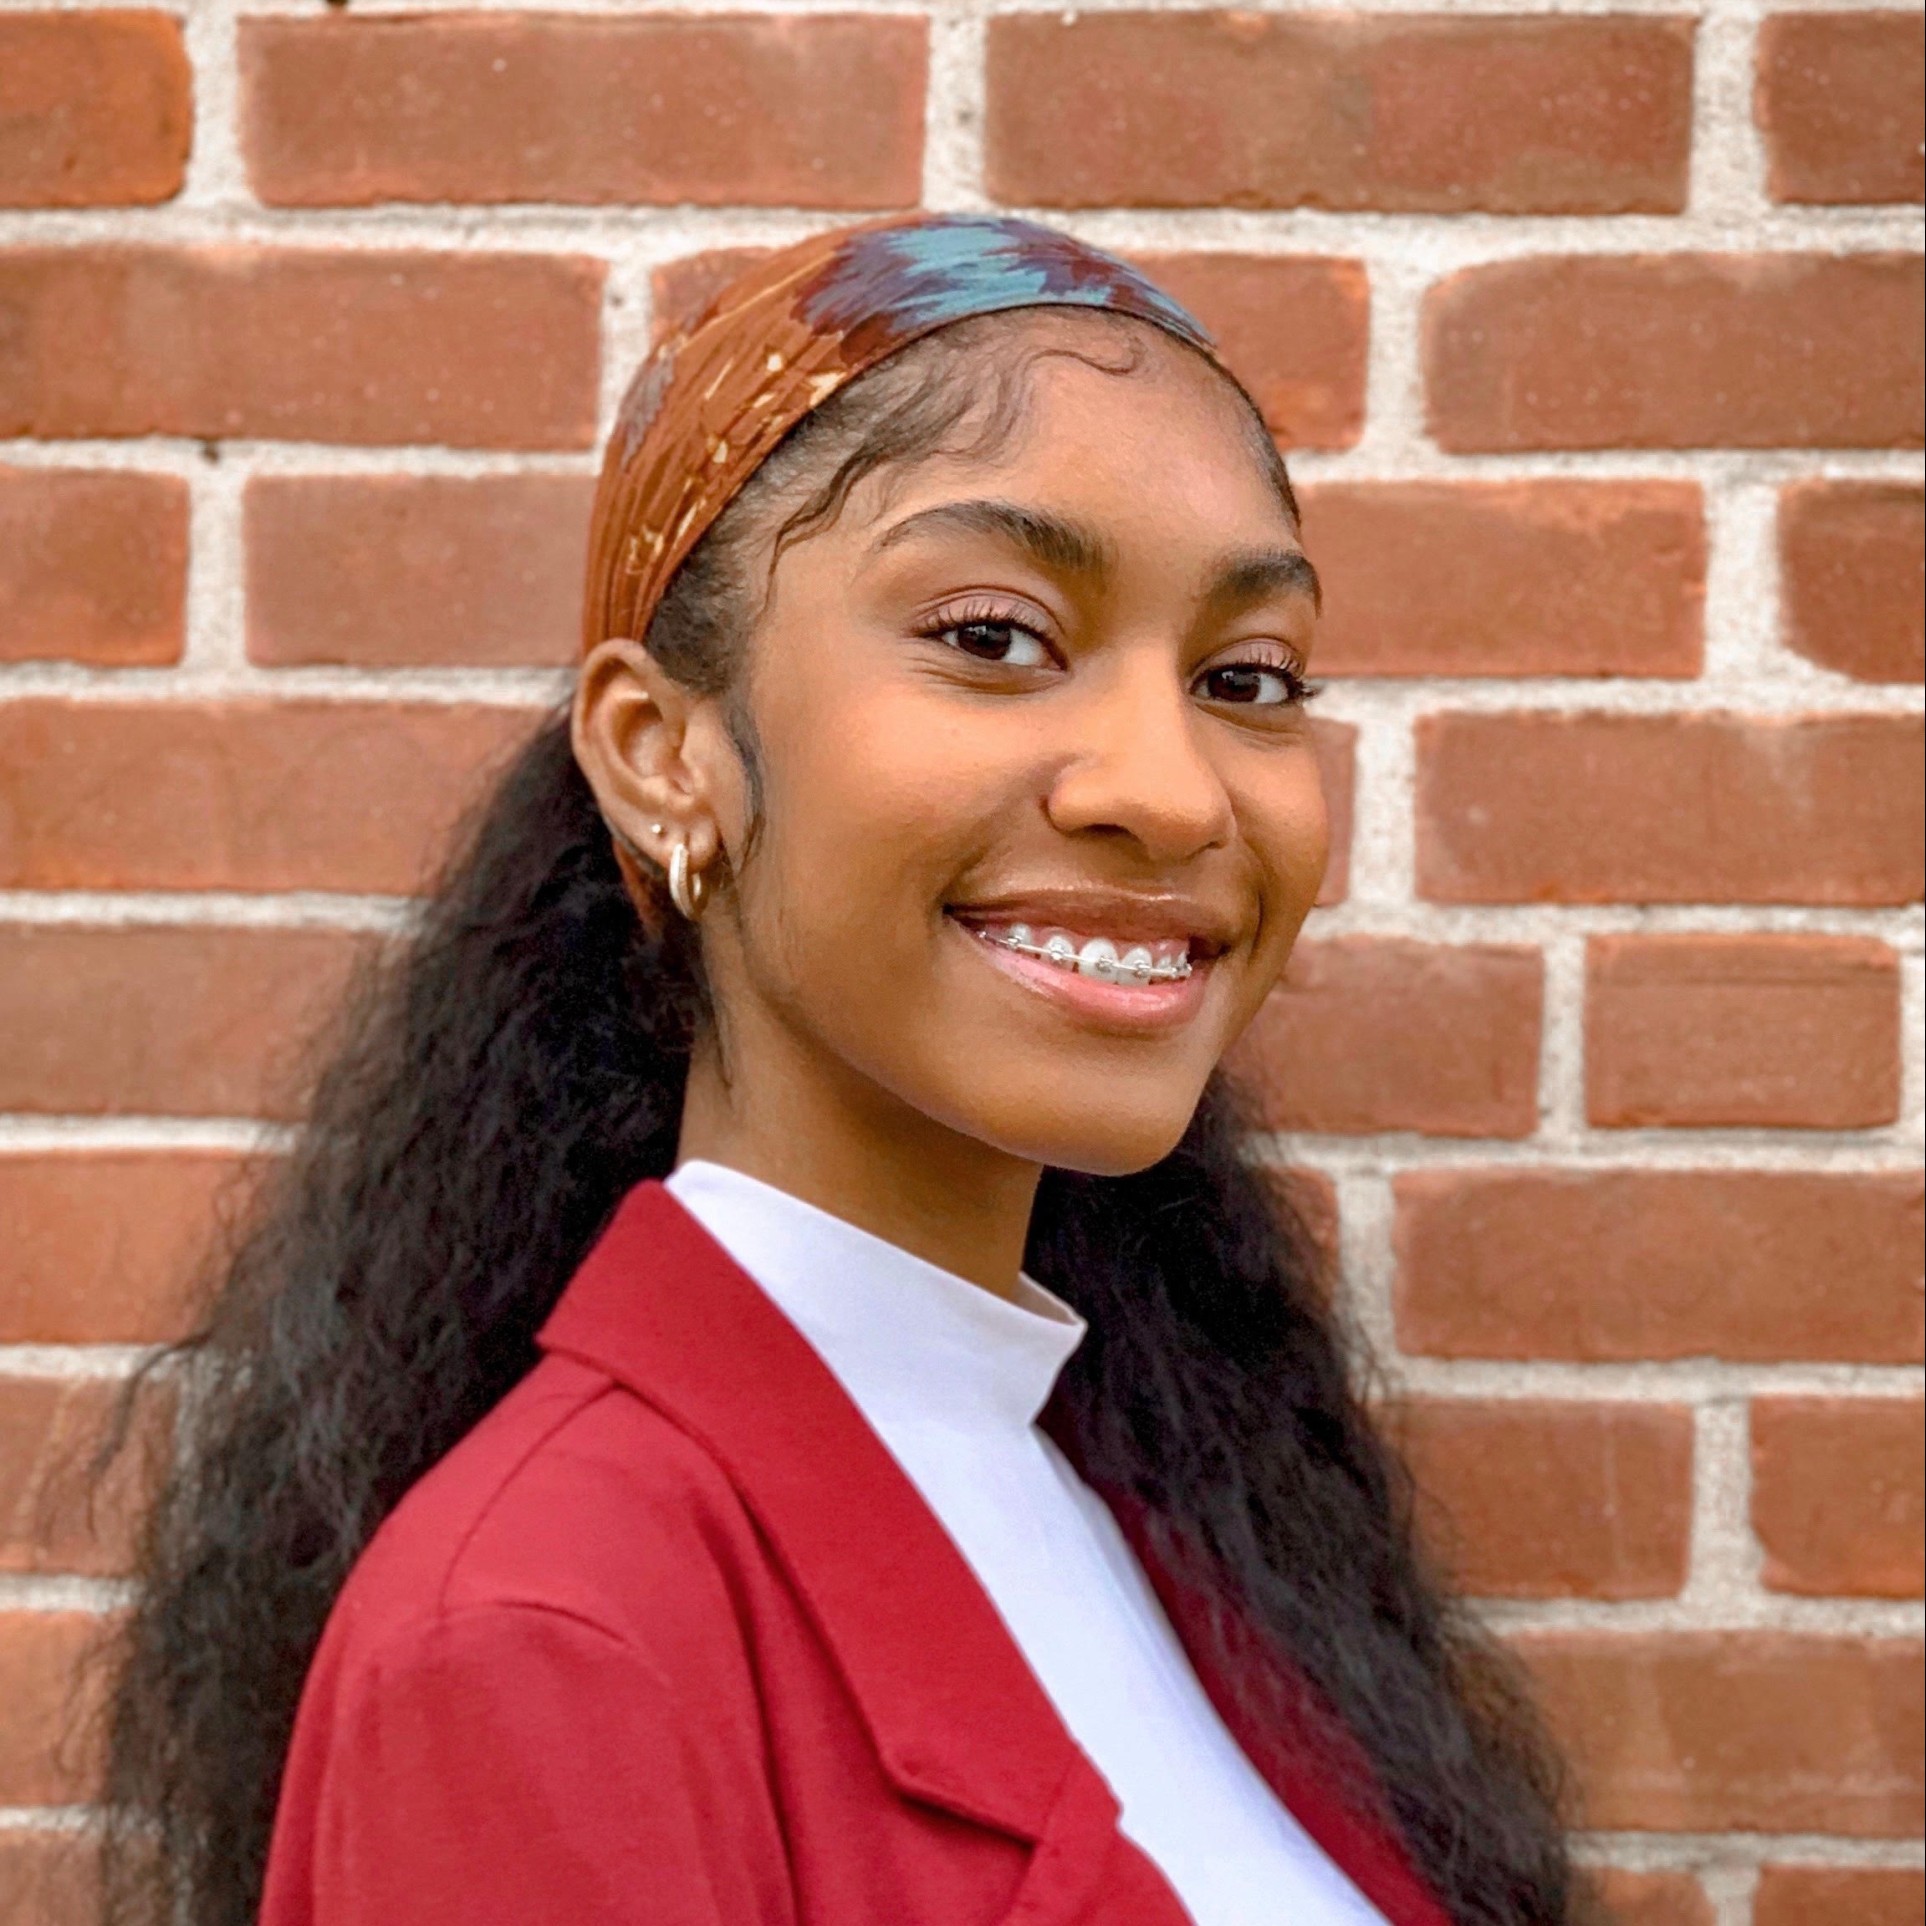 Cienna Benn smiles at the camera in front of a brown brick wall. She wears a red blazer over a white shirt.